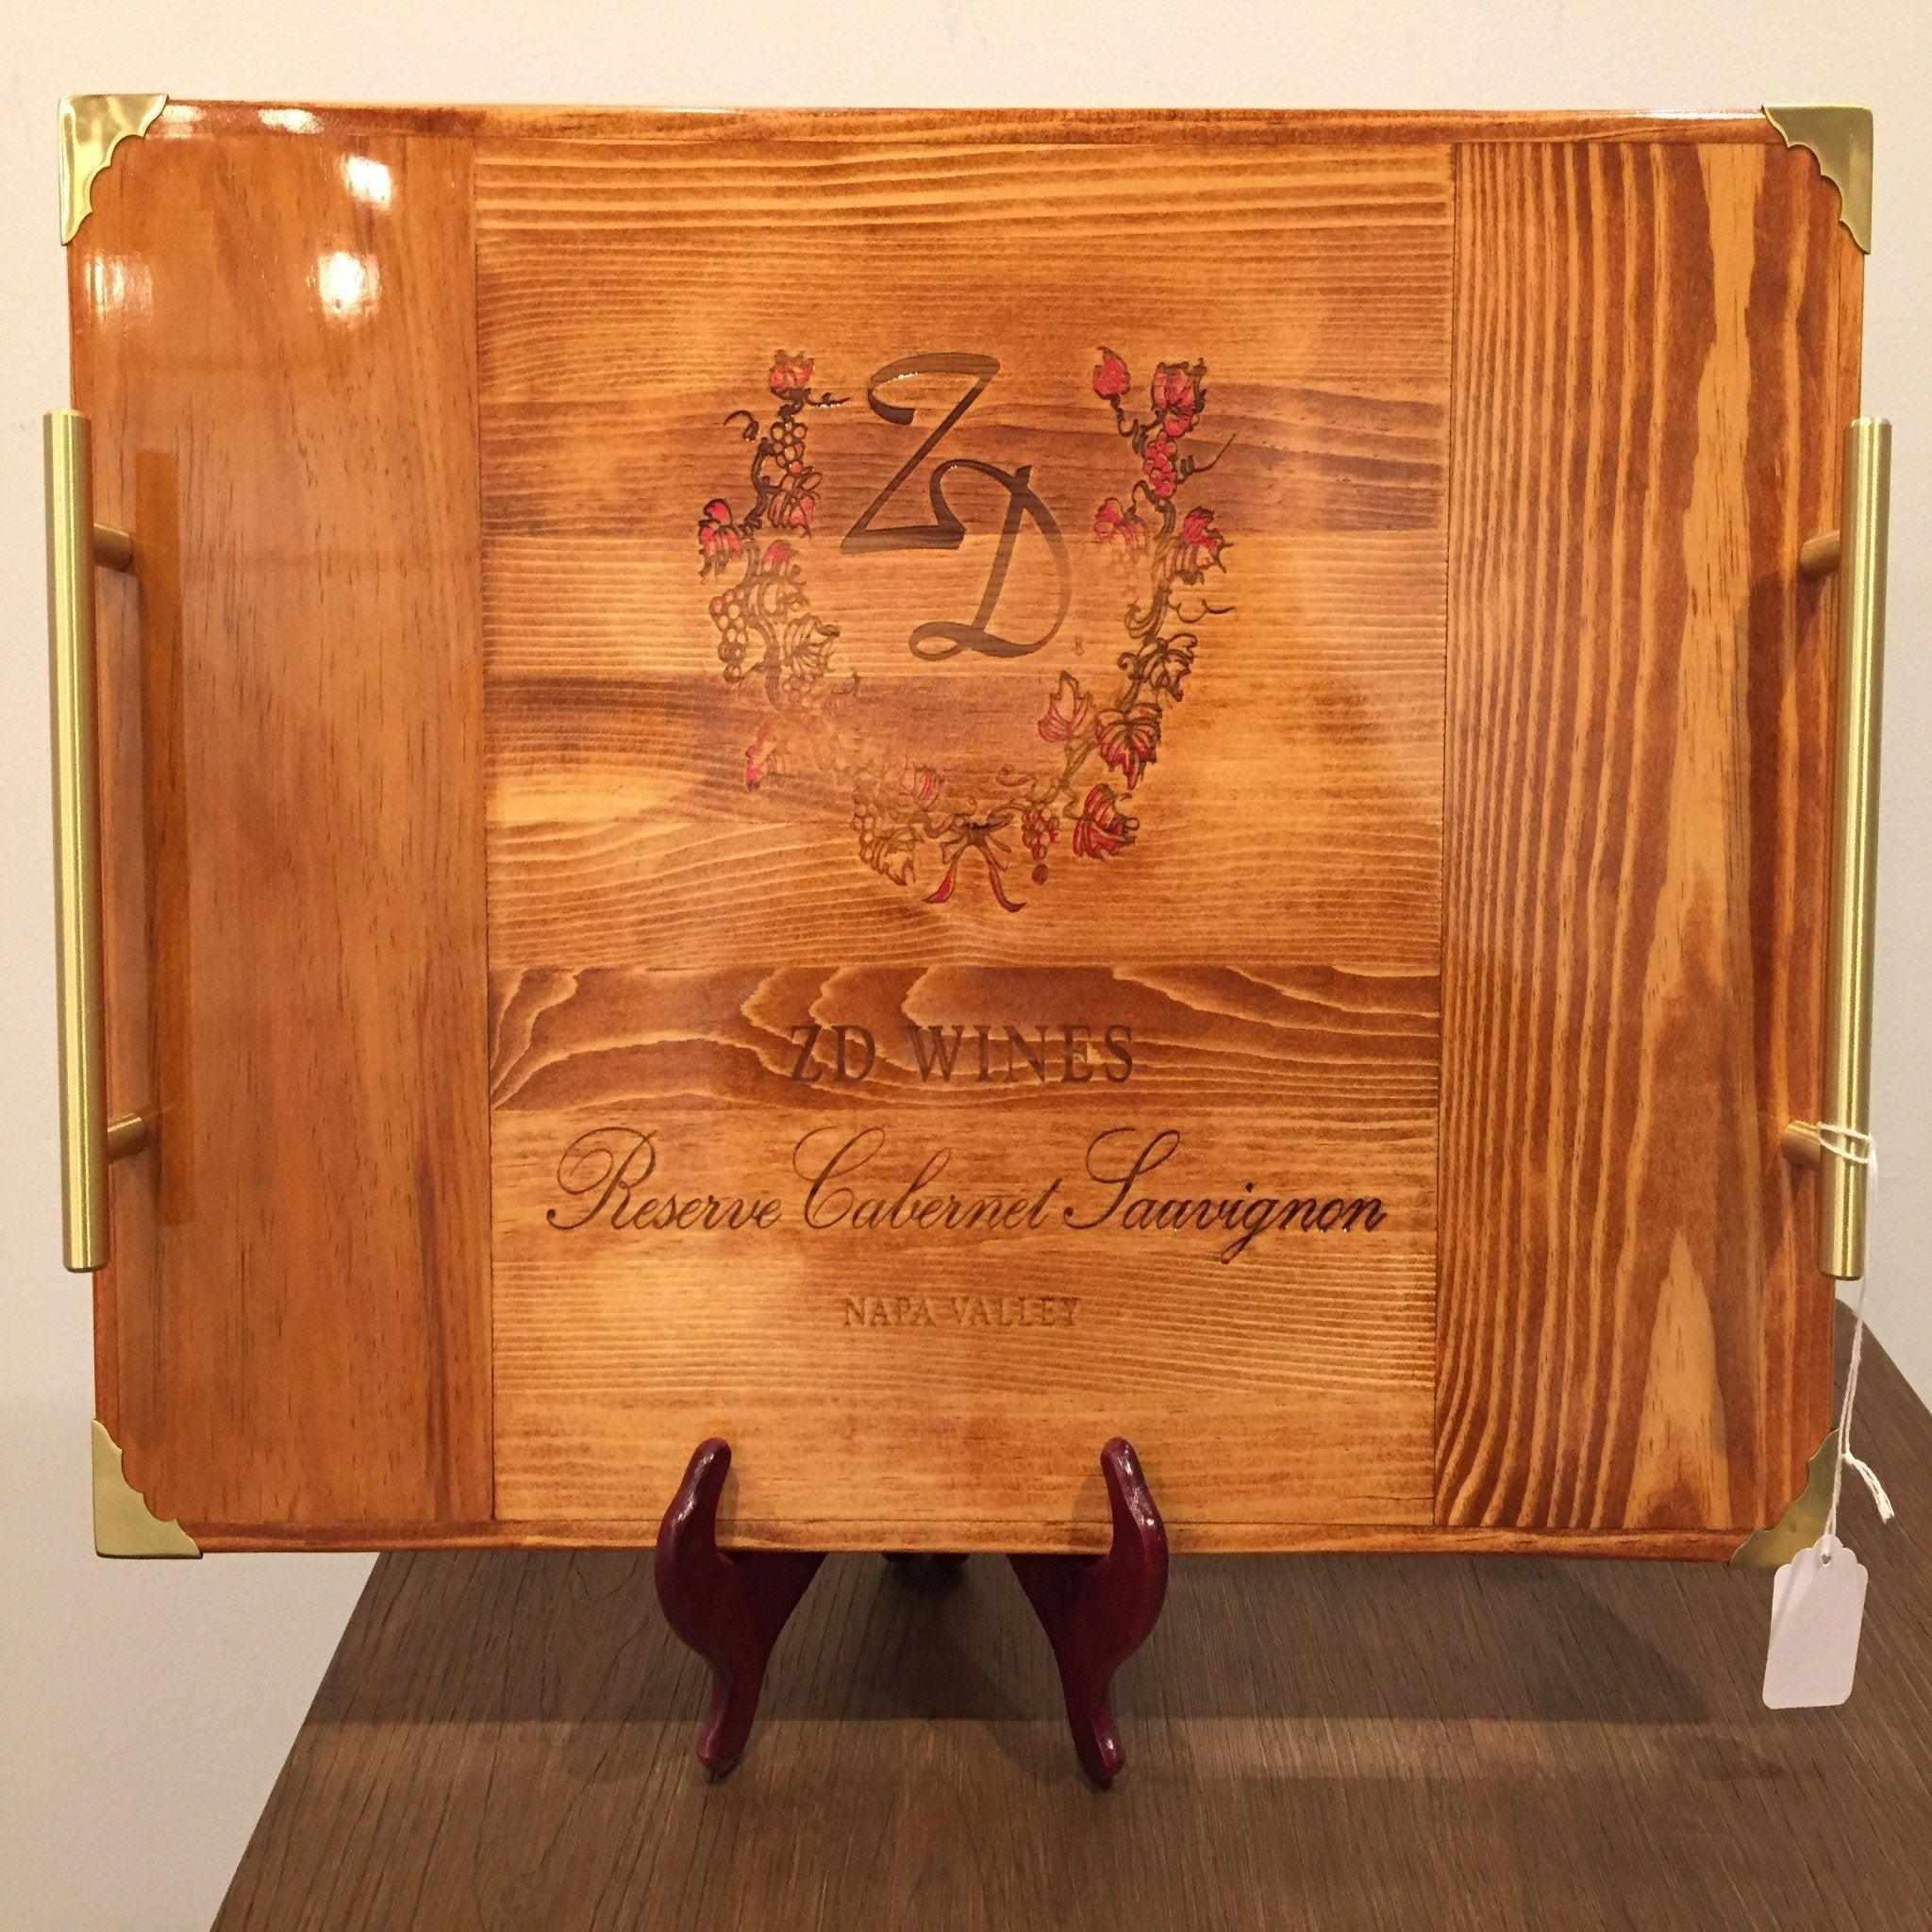 ZD Wines Serving Tray created by Satterfield Originals - Red Bank Artisan Collective jewelry art vintage recycled Serving Tray, Satterfield OriginalsZ